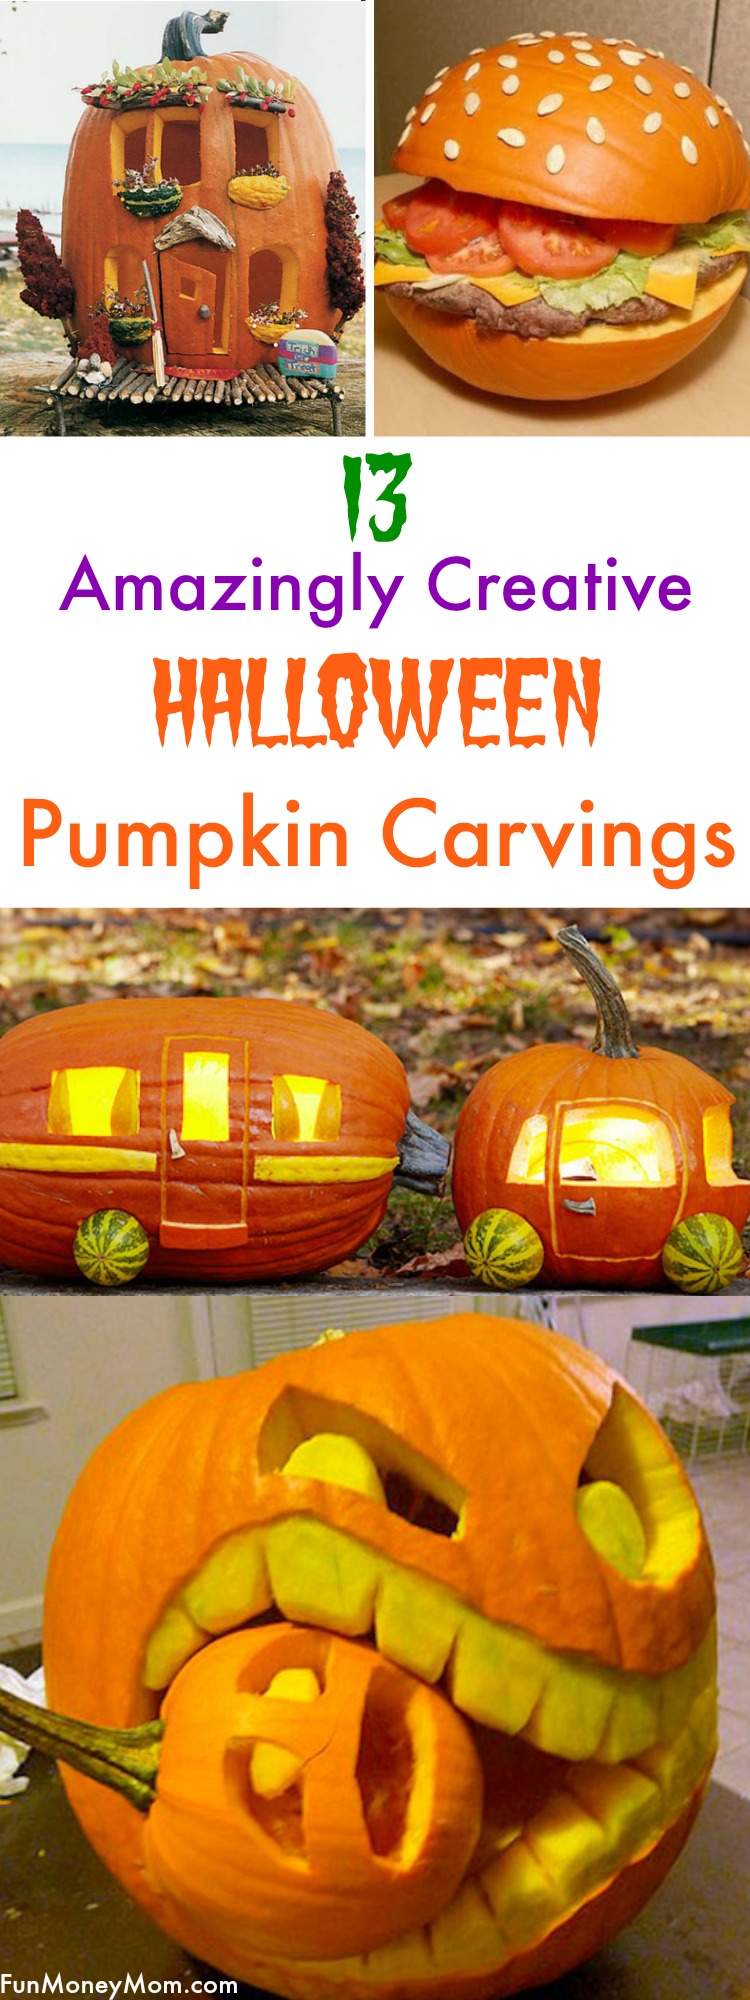 Do you love carving pumpkins with your family for Halloween? These amazingly creative pumpkin carvings will inspire you to make an incredible Halloween pumpkin of your own!